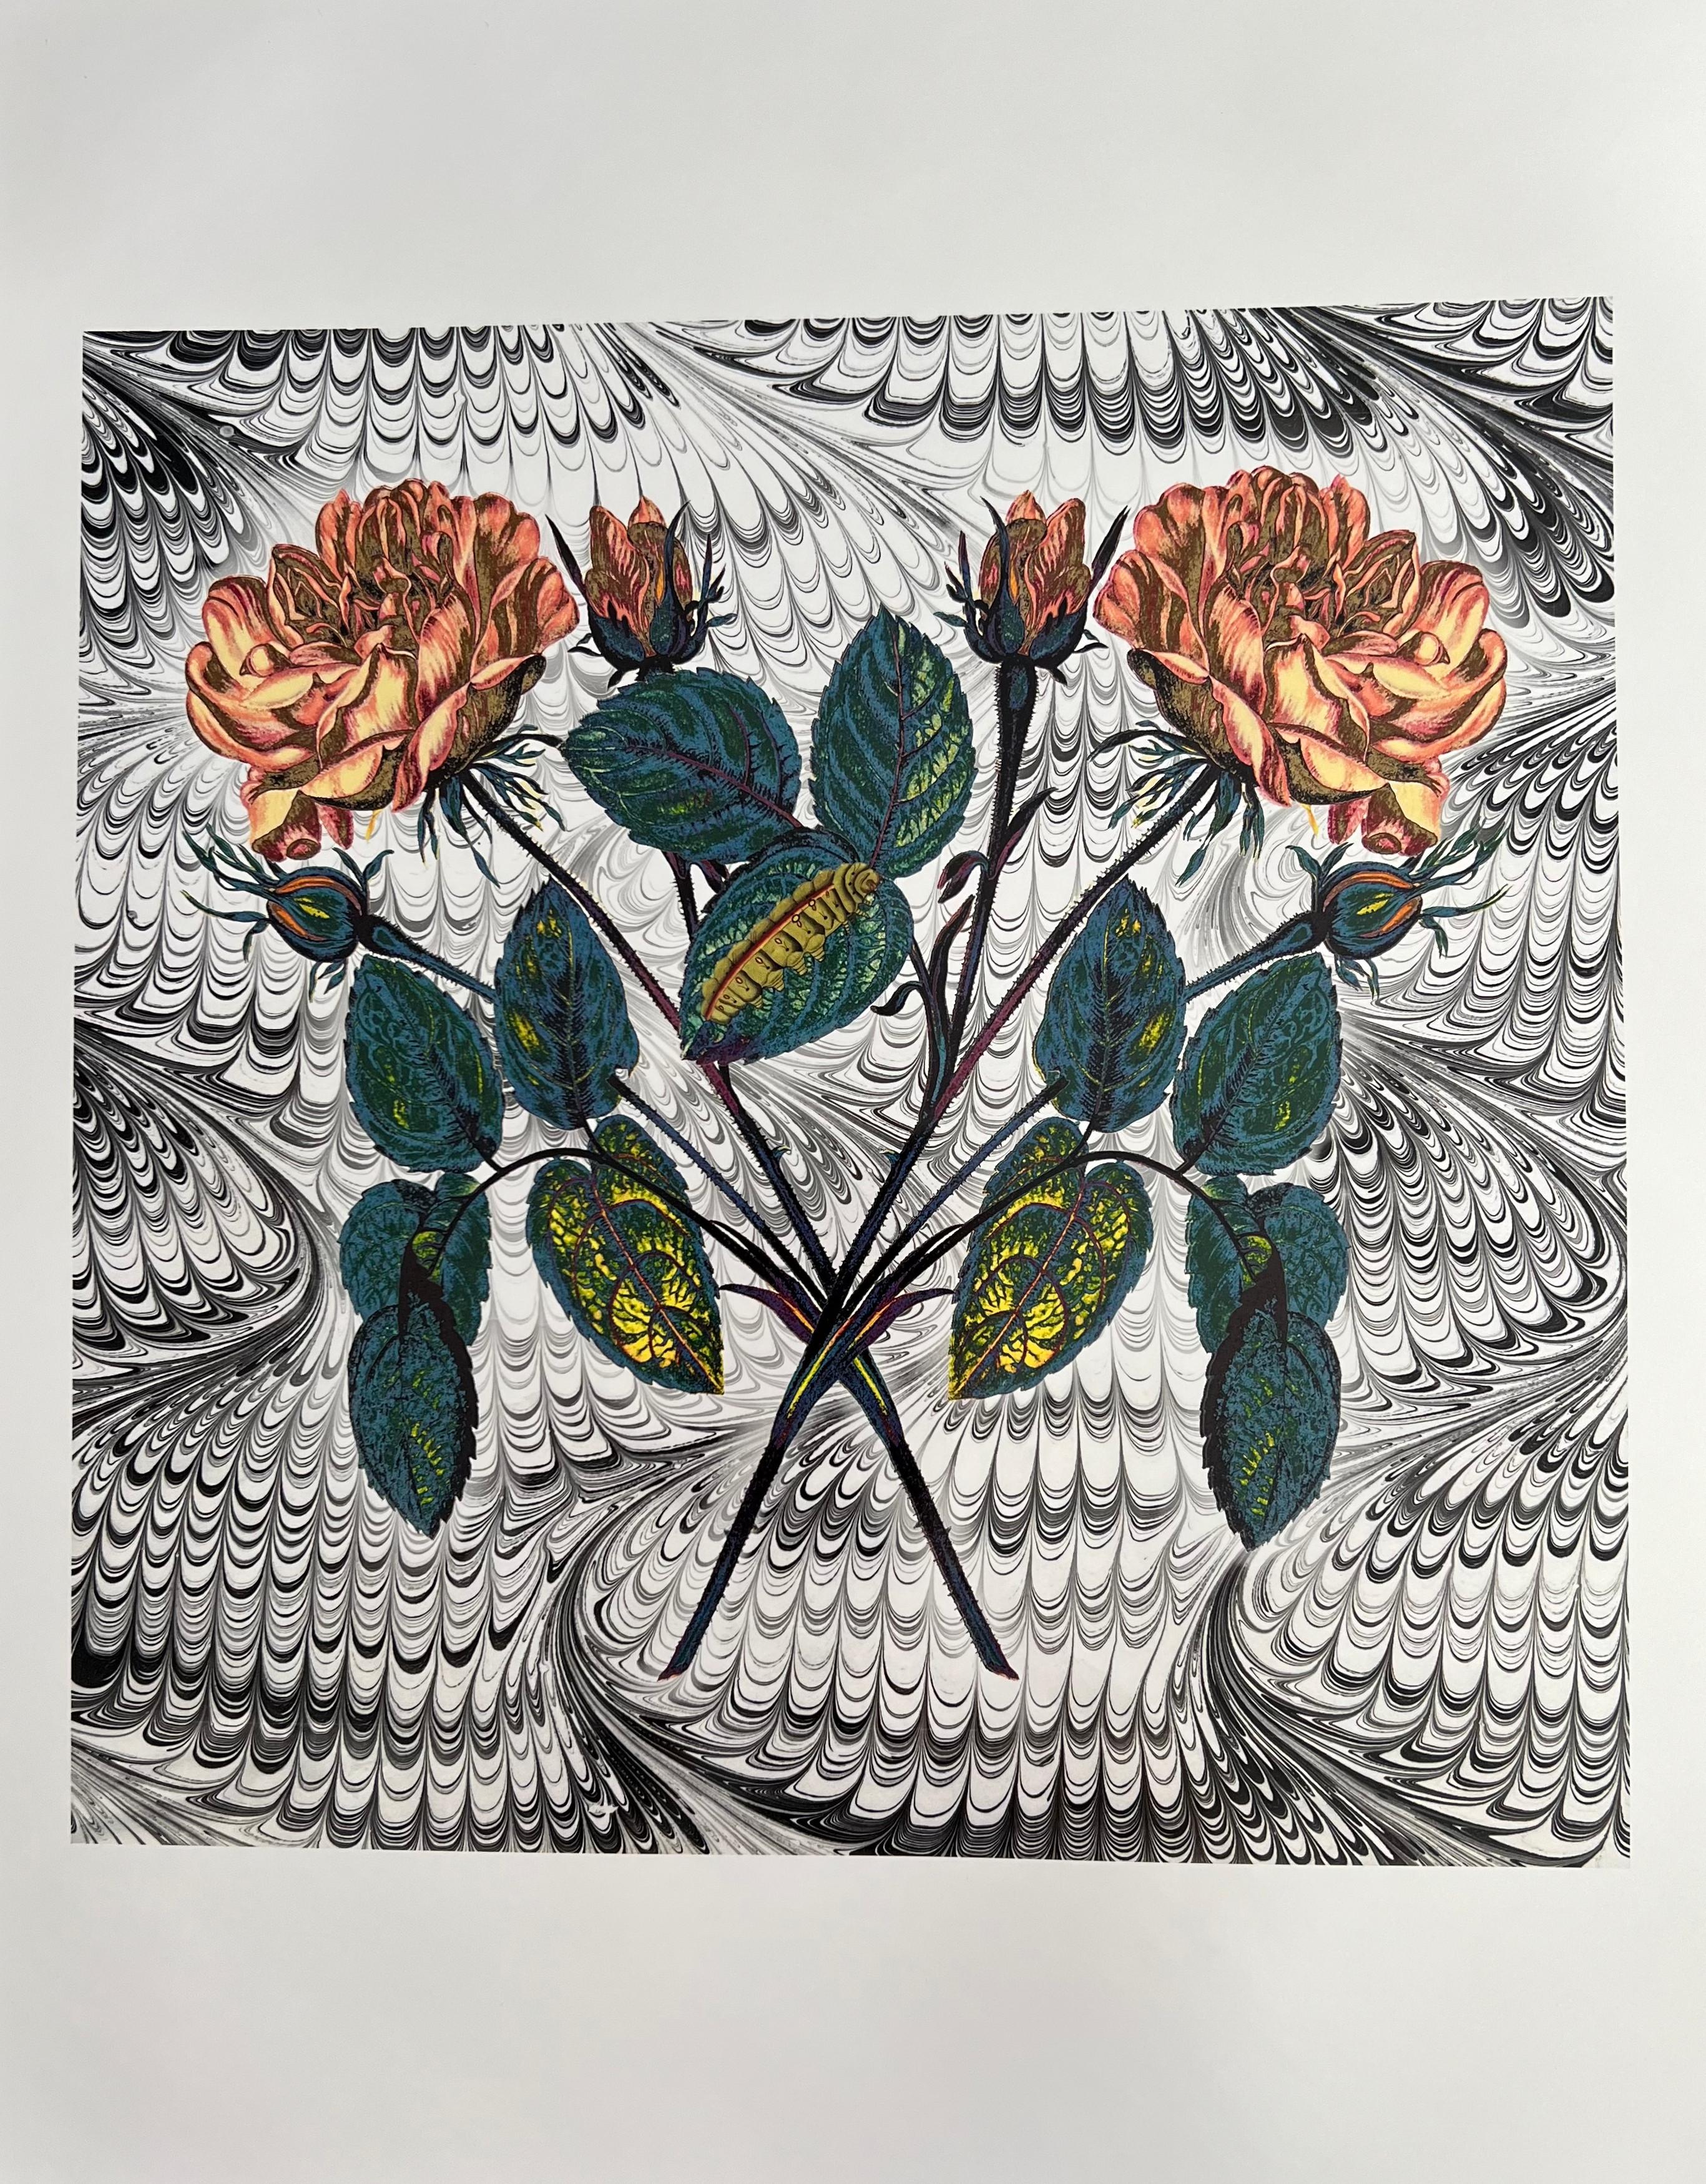 Louise Marler Figurative Print - Crossed Roses (Cut-out, Collage, Black & White, Patterns, Organic)